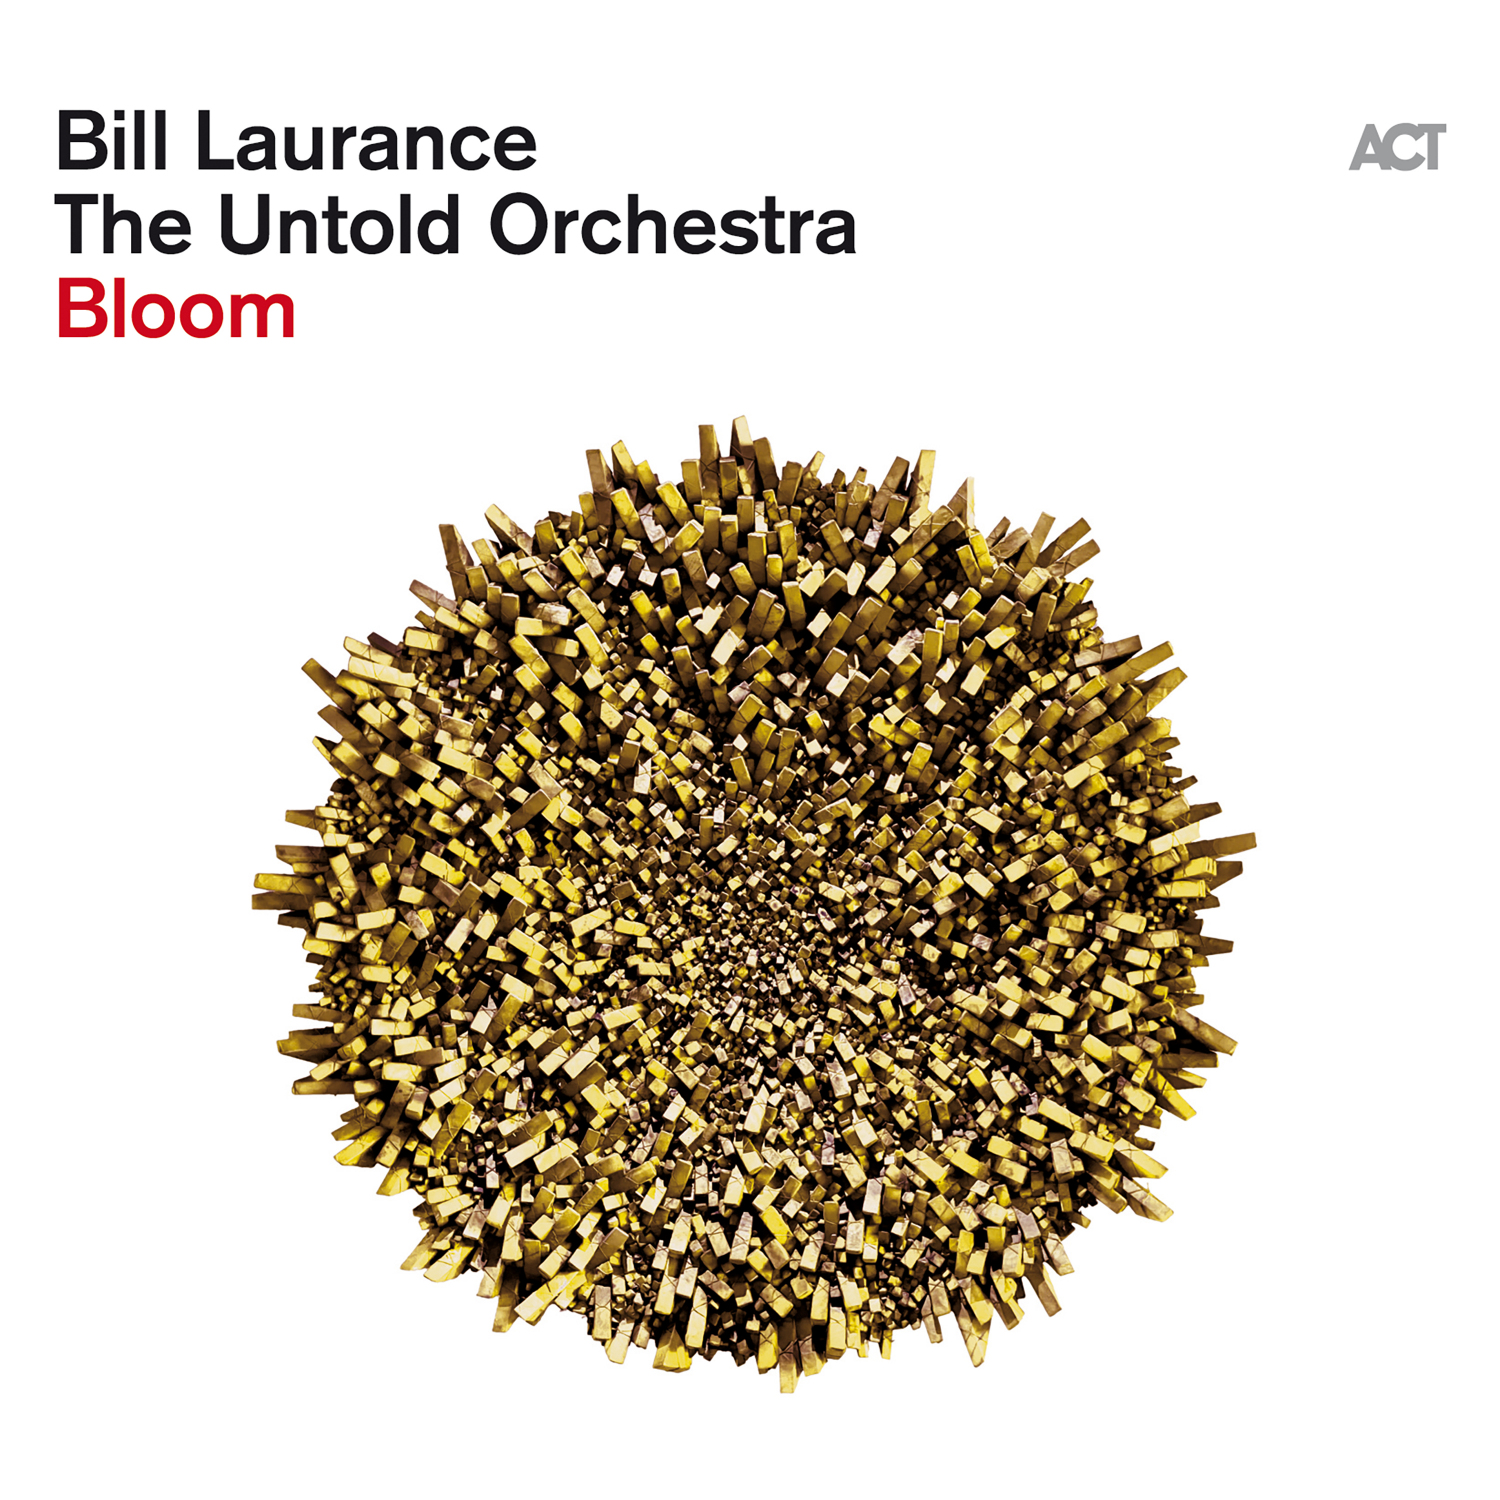 Art for Bloom (Bill Laurance) by Bill Laurance & The Untold Orchestra